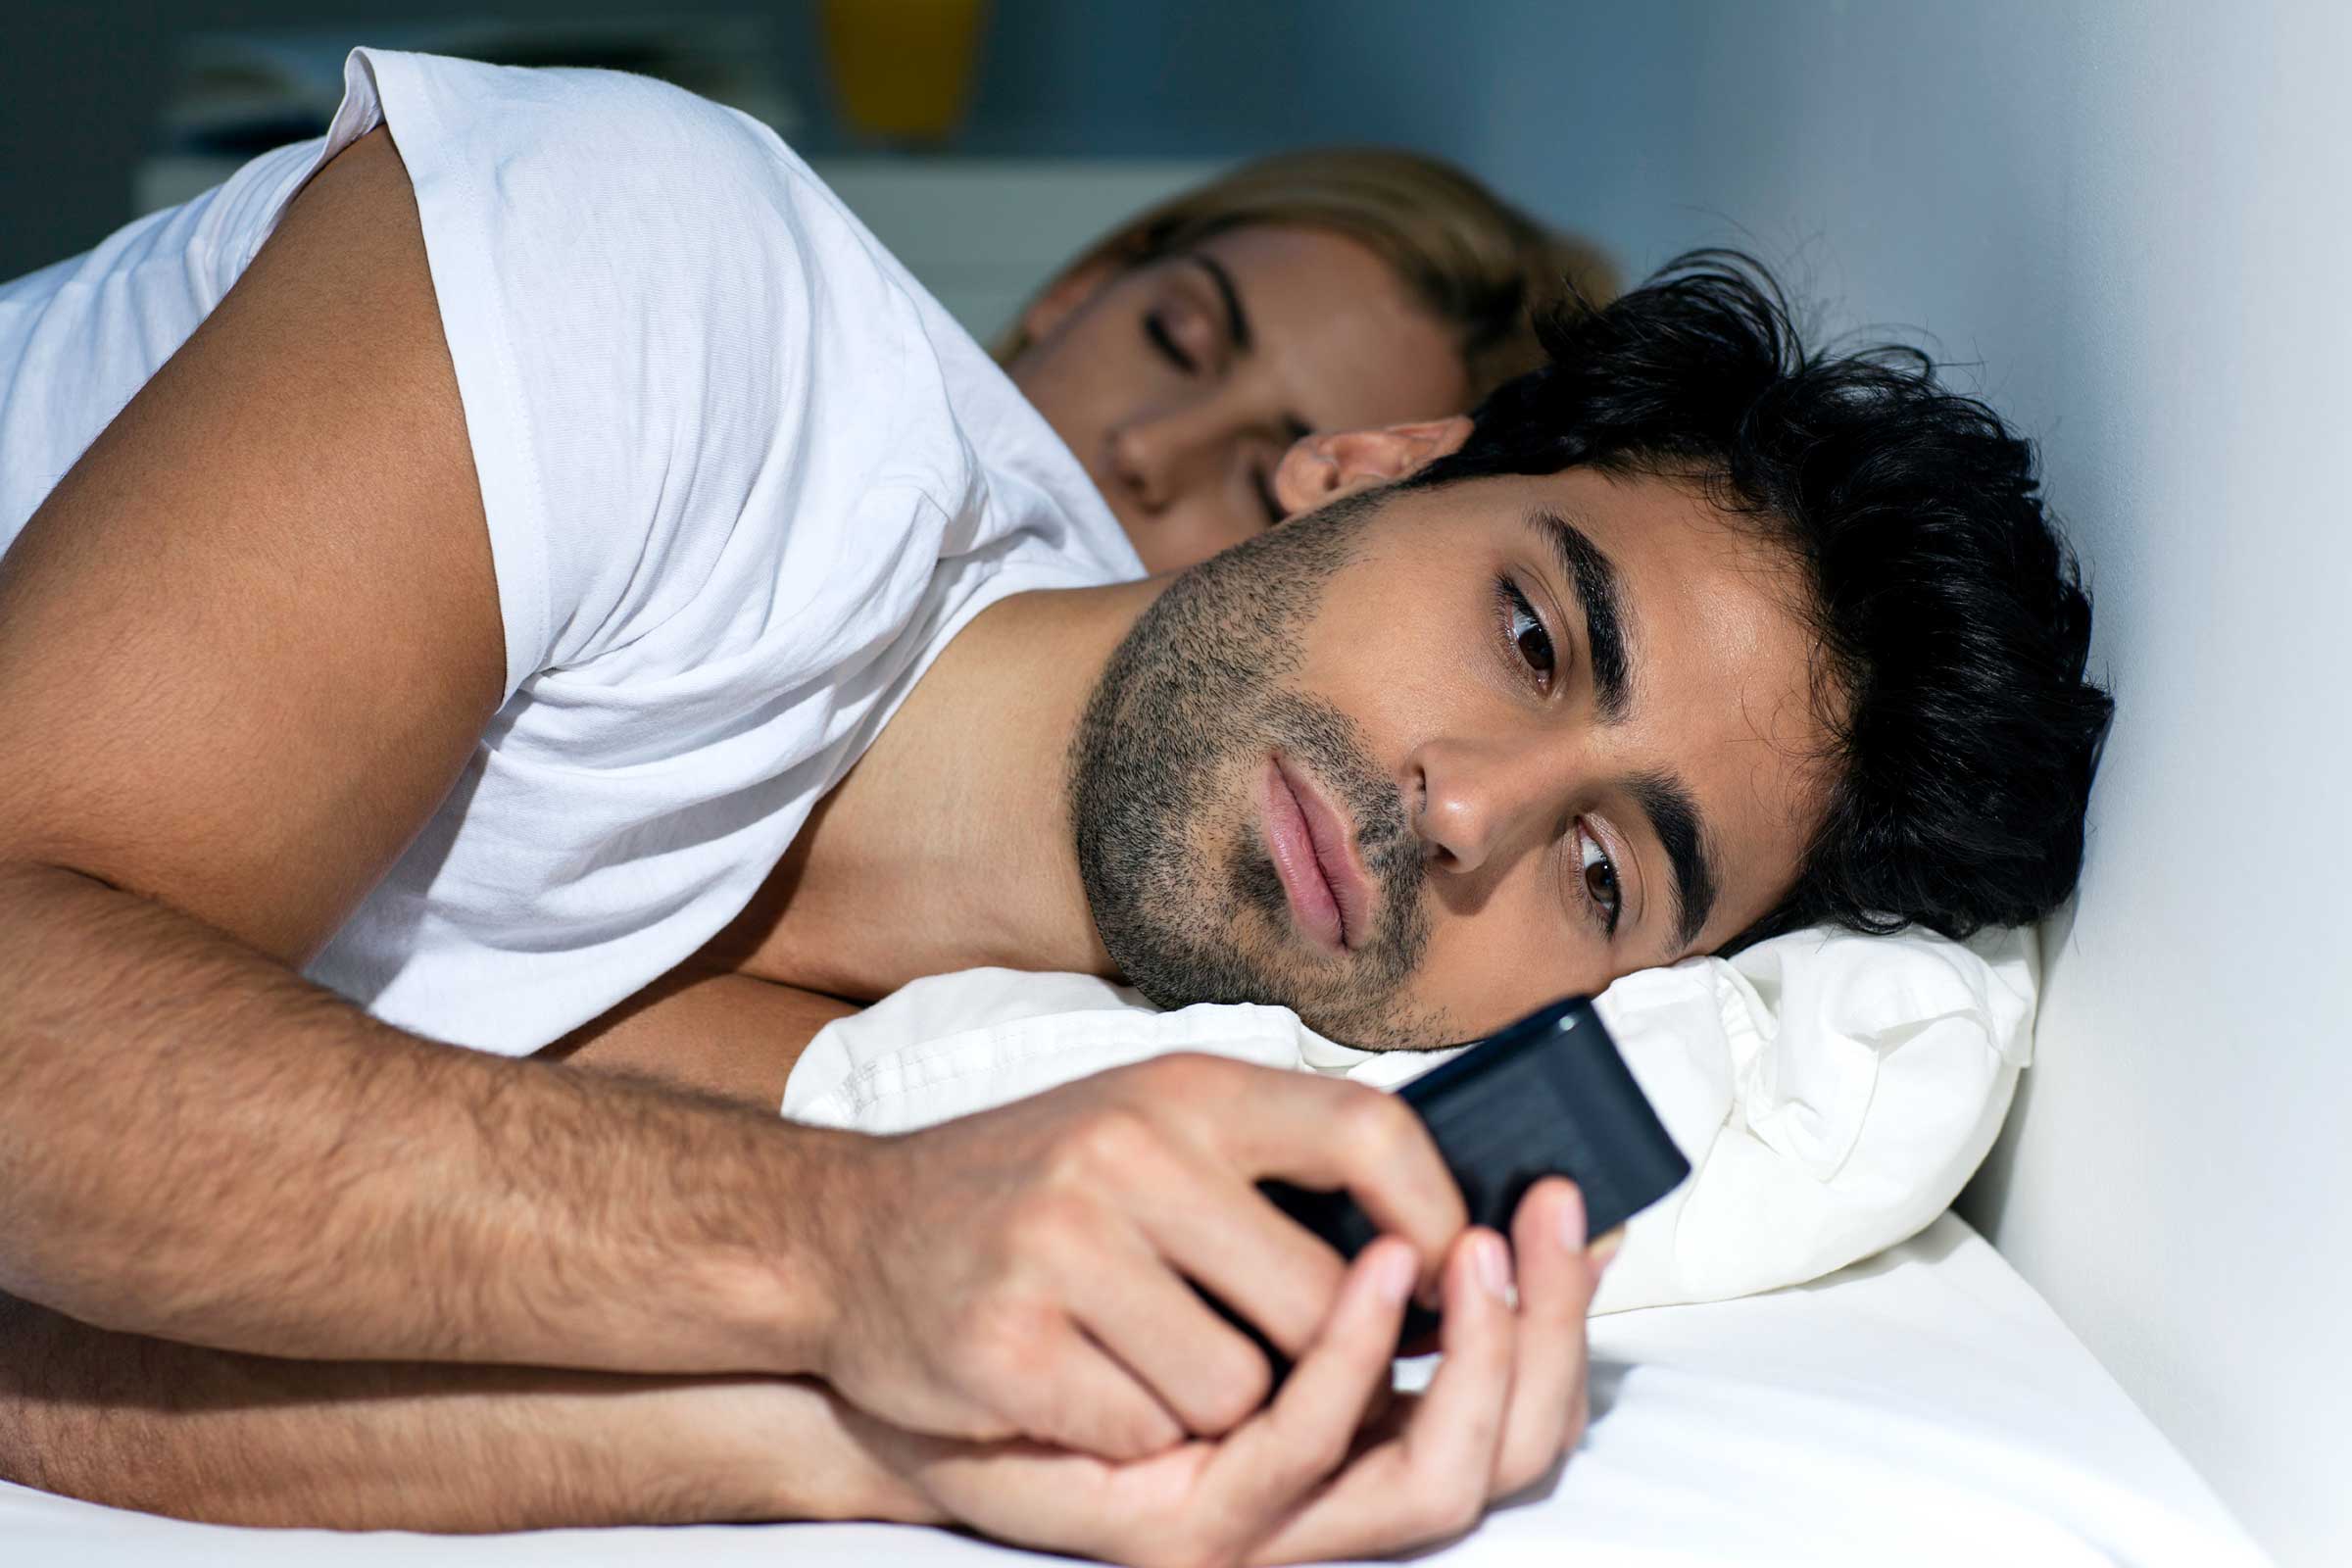 Five quick signs if your partner is cheating on photo